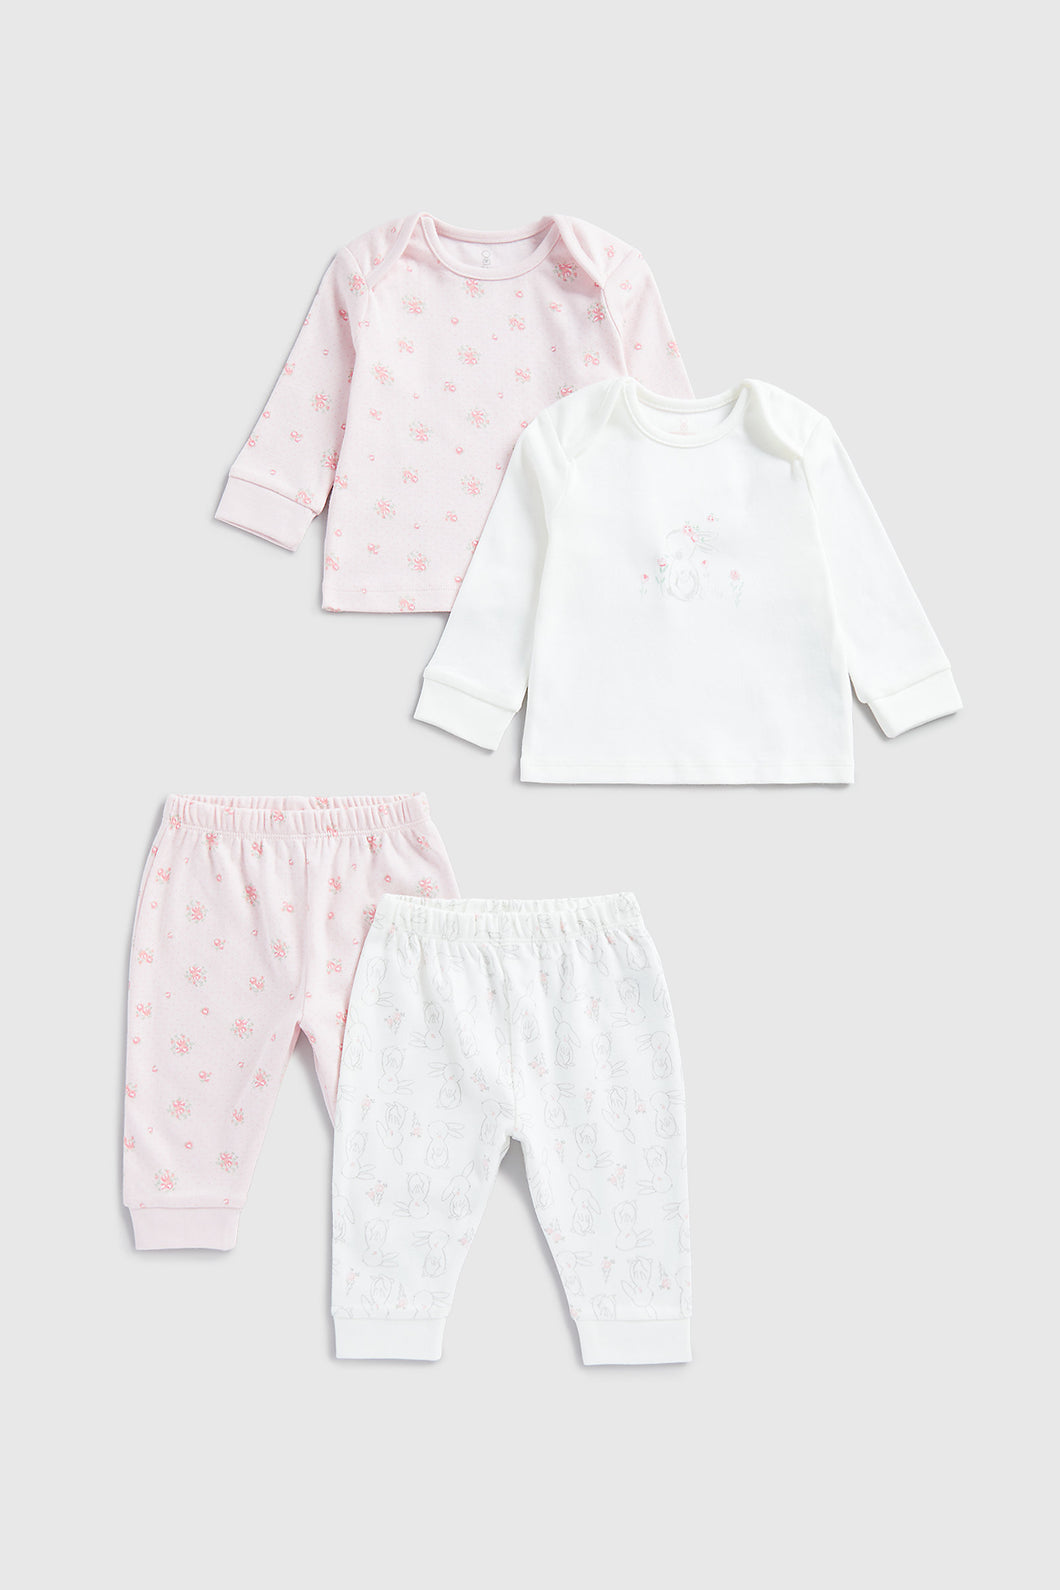 Mothercare Floral Bunny Baby Pyjamas - 2 Pack